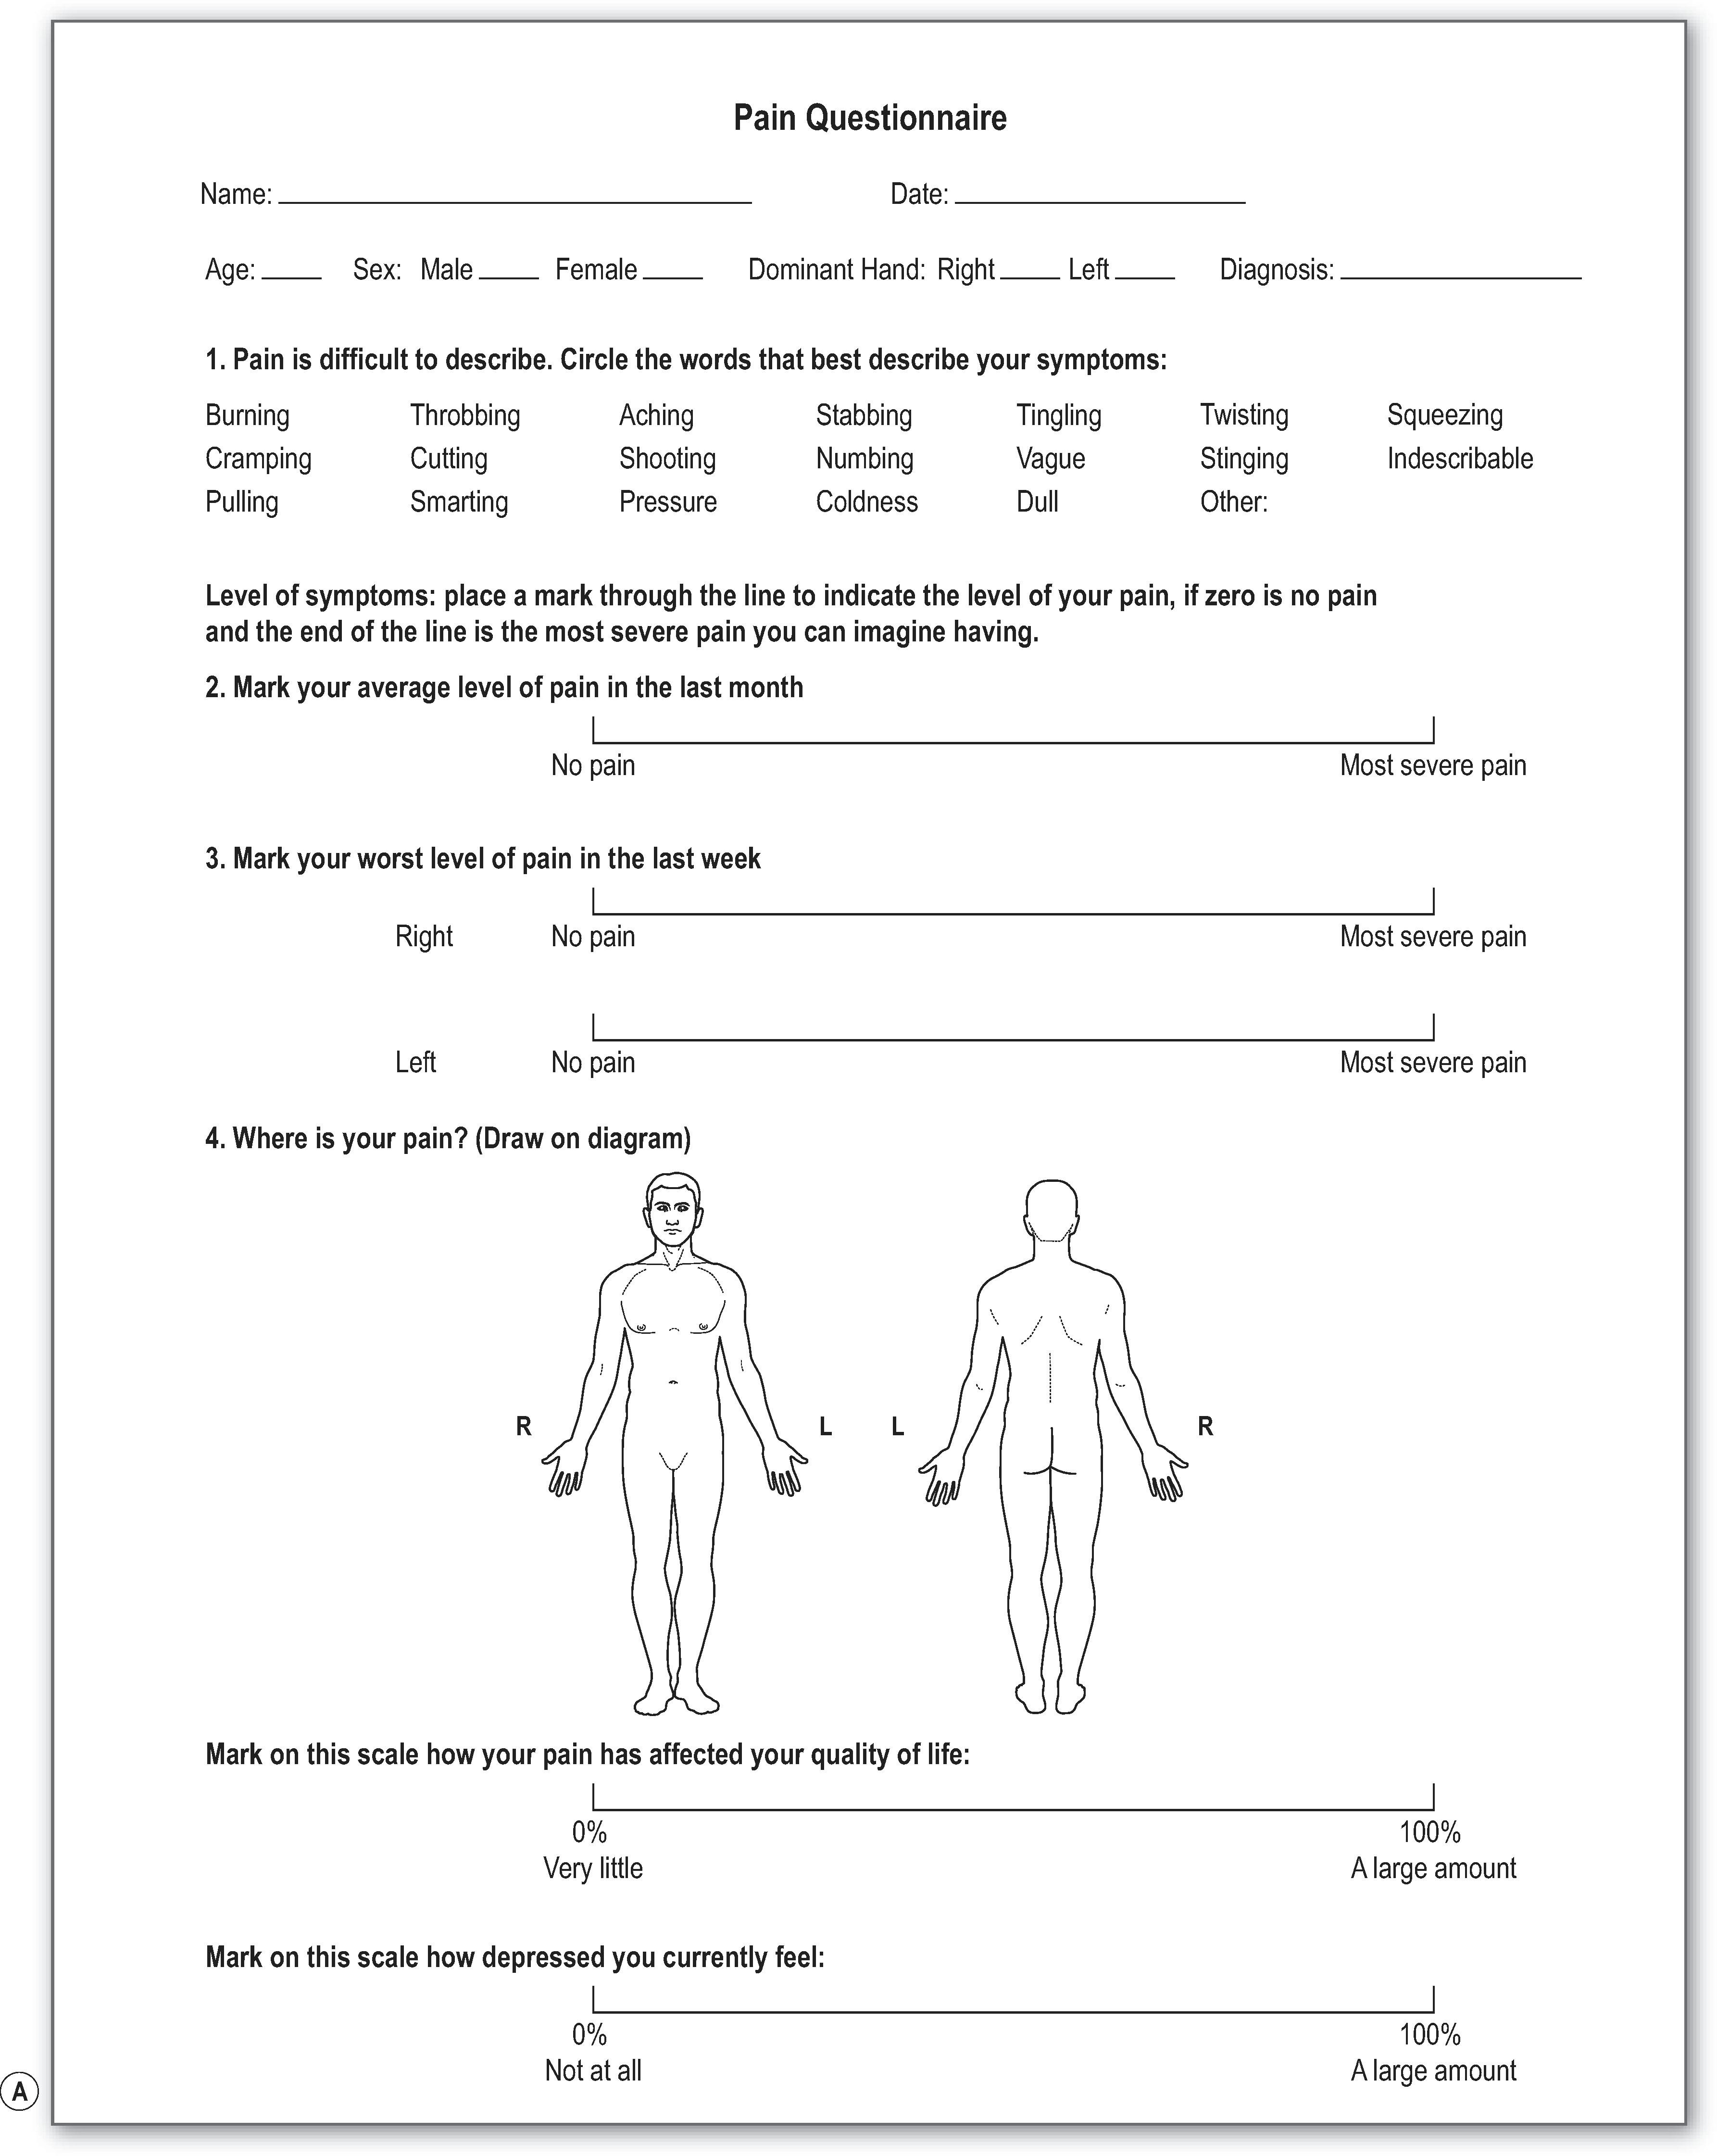 Figure 26.3, (A-D) The pain questionnaire is a valuable tool for qualifying and quantifying patient pain and the impact their injury is having on their life. This has uses both in obtaining baseline information, and also in tracking progress as patients recover. This questionnaire is filled out by every nerve patient at each office visit.